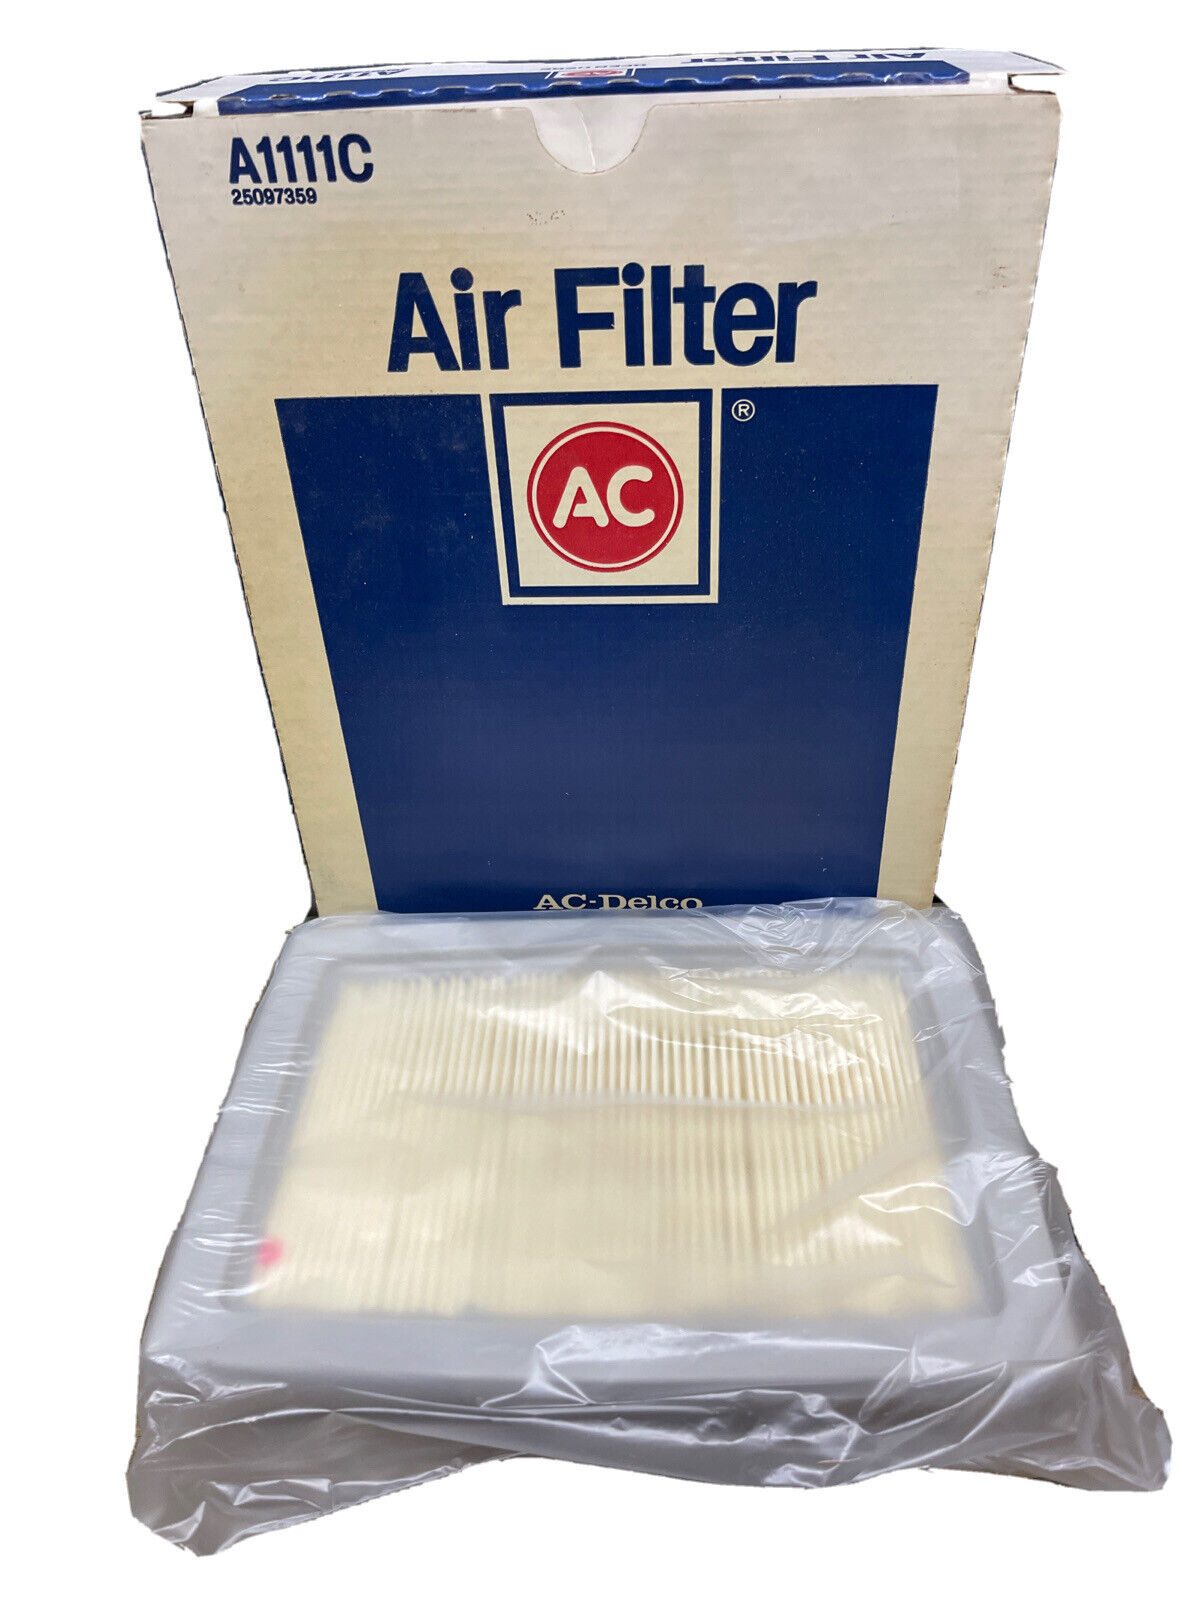 AC Delco air filter a 1111c New Sealed in Box